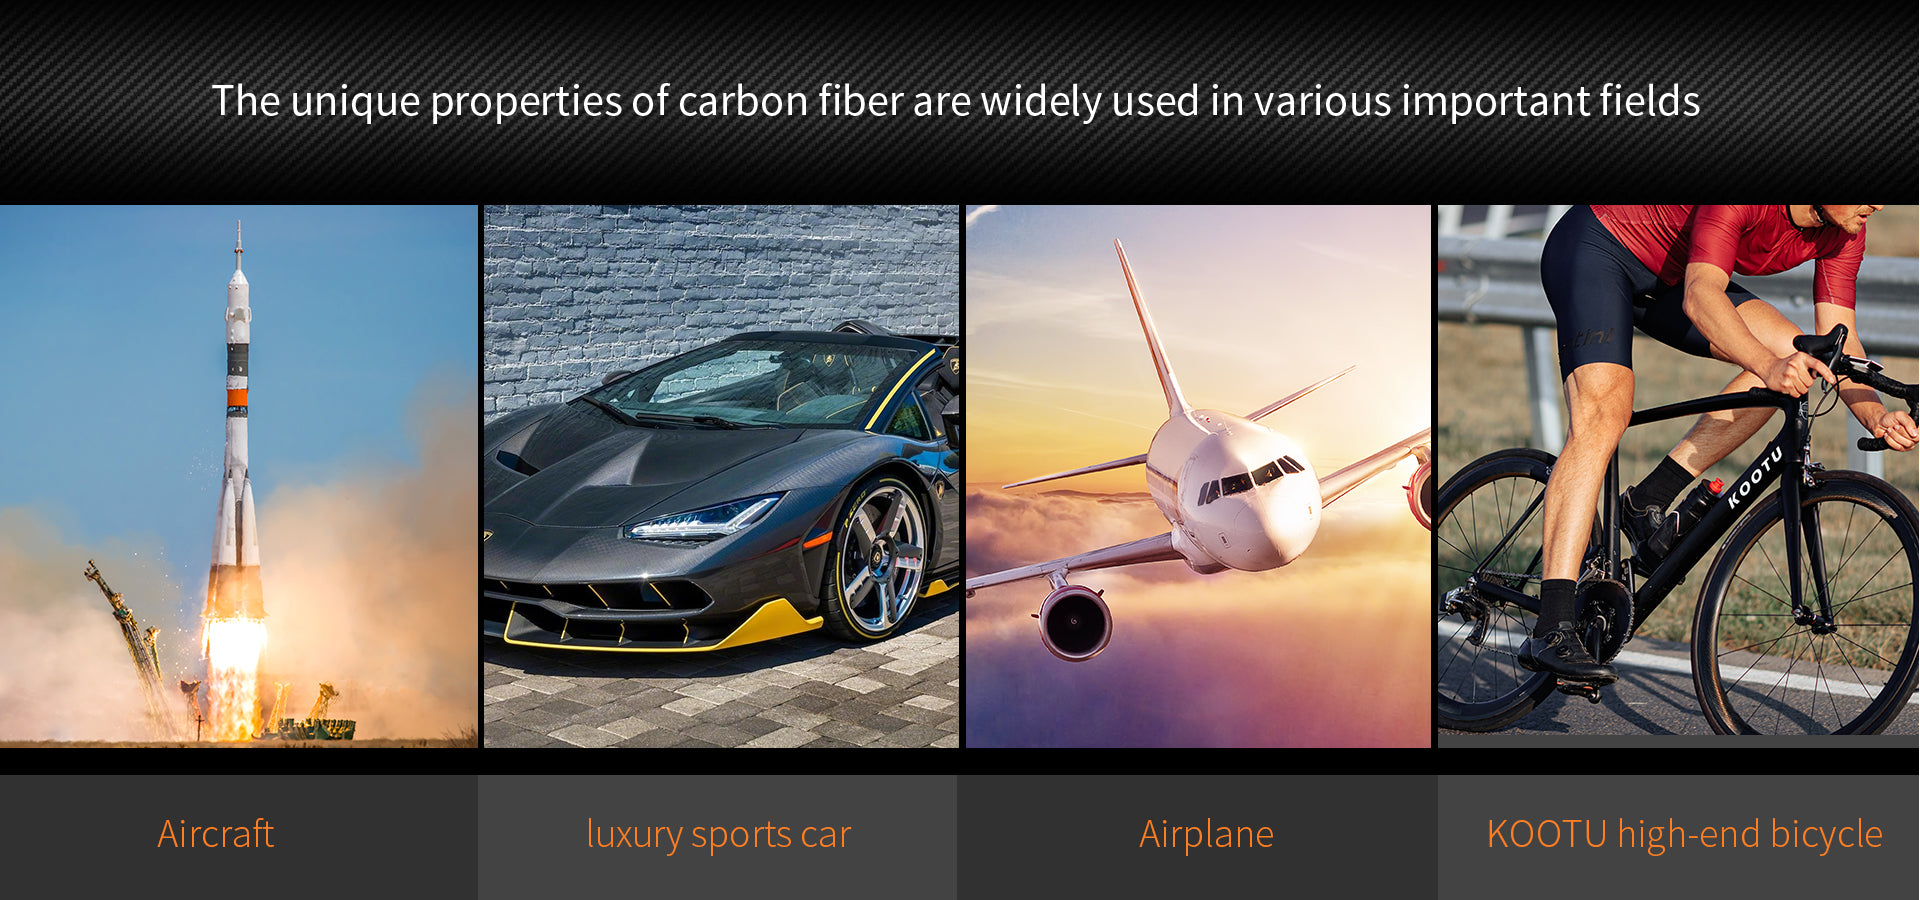 Carbon fiber is widely used